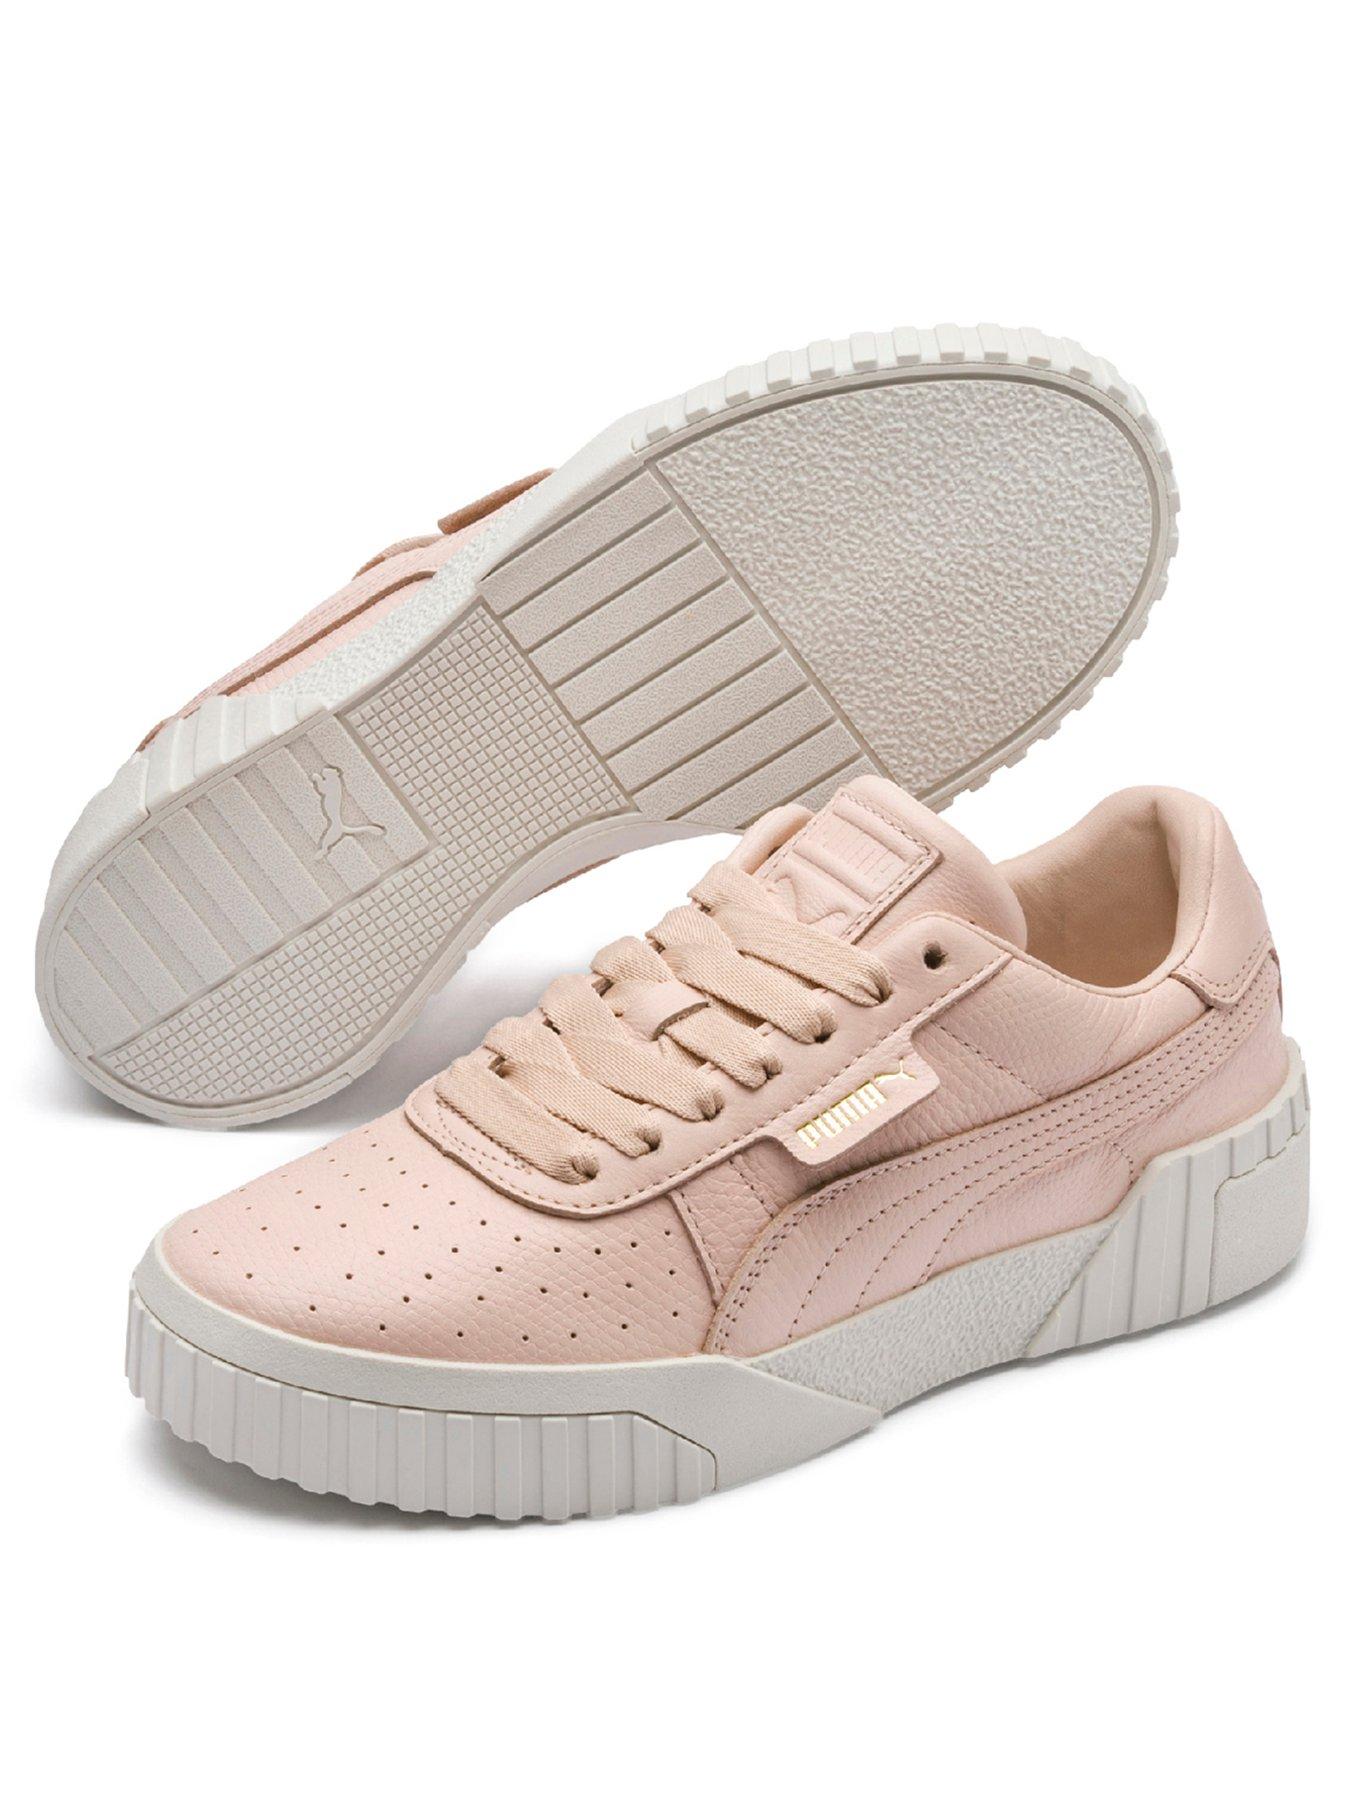 white and pink puma trainers